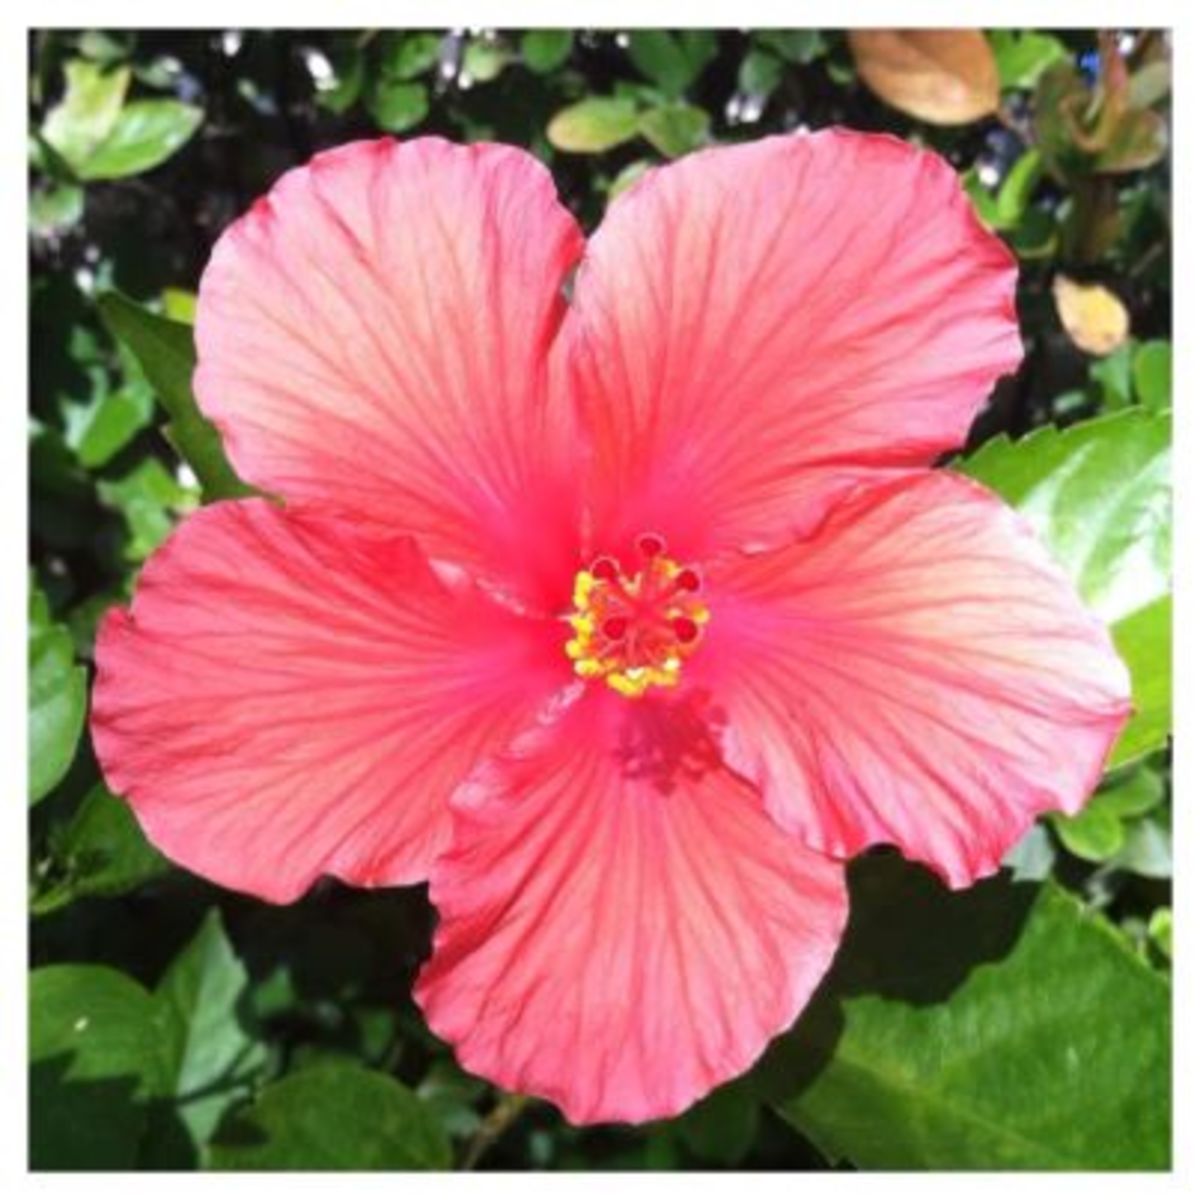 A hibiscus flower means life and hope to me.